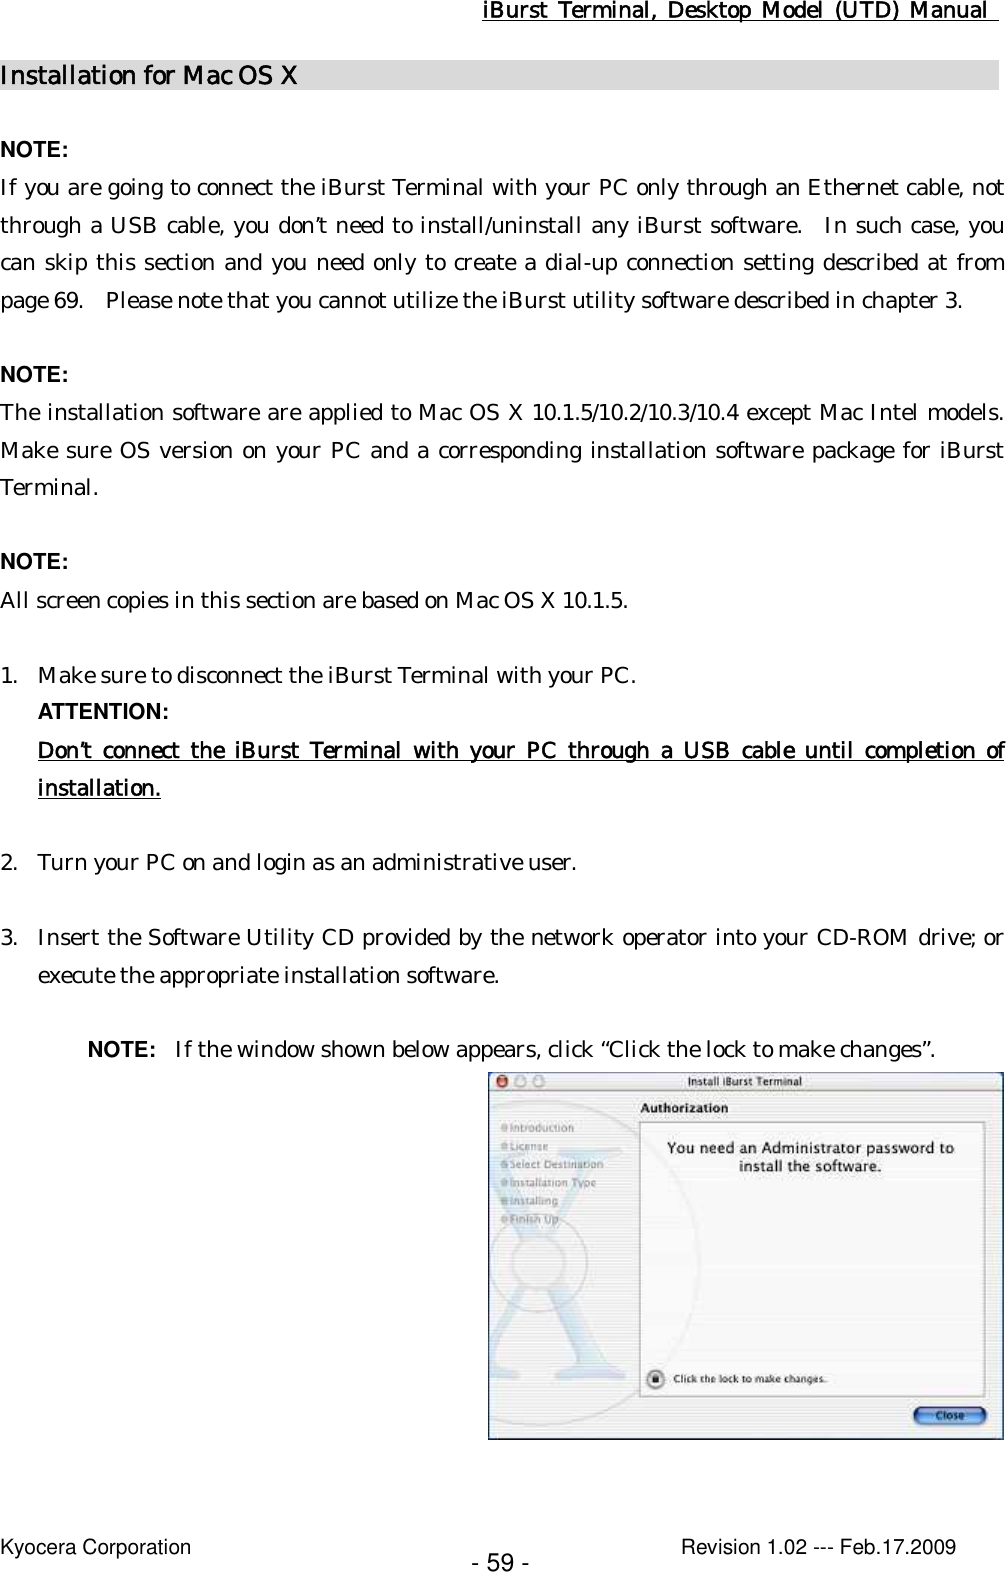 iBurst  Terminal, Desktop  Model  (UTD)  Manual    Kyocera Corporation                                                                                              Revision 1.02 --- Feb.17.2009 - 59 - Installation for Mac OS X                                                          NOTE: If you are going to connect the iBurst Terminal with your PC only through an Ethernet cable, not through a USB cable, you don’t need to install/uninstall any iBurst software.   In such case, you can skip this section and you need only to create a dial-up connection setting described at from page 69.    Please note that you cannot utilize the iBurst utility software described in chapter 3.  NOTE: The installation software are applied to Mac OS X 10.1.5/10.2/10.3/10.4 except Mac Intel models.  Make sure OS version on your PC and a corresponding installation software package for iBurst Terminal.  NOTE: All screen copies in this section are based on Mac OS X 10.1.5.  1. Make sure to disconnect the iBurst Terminal with your PC. ATTENTION: Don’t  connect  the  iBurst  Terminal  with  your  PC  through  a  USB cable until completion of installation.  2. Turn your PC on and login as an administrative user.  3. Insert the Software Utility CD provided by the network operator into your CD-ROM drive; or execute the appropriate installation software.  NOTE:  If the window shown below appears, click “Click the lock to make changes”.   